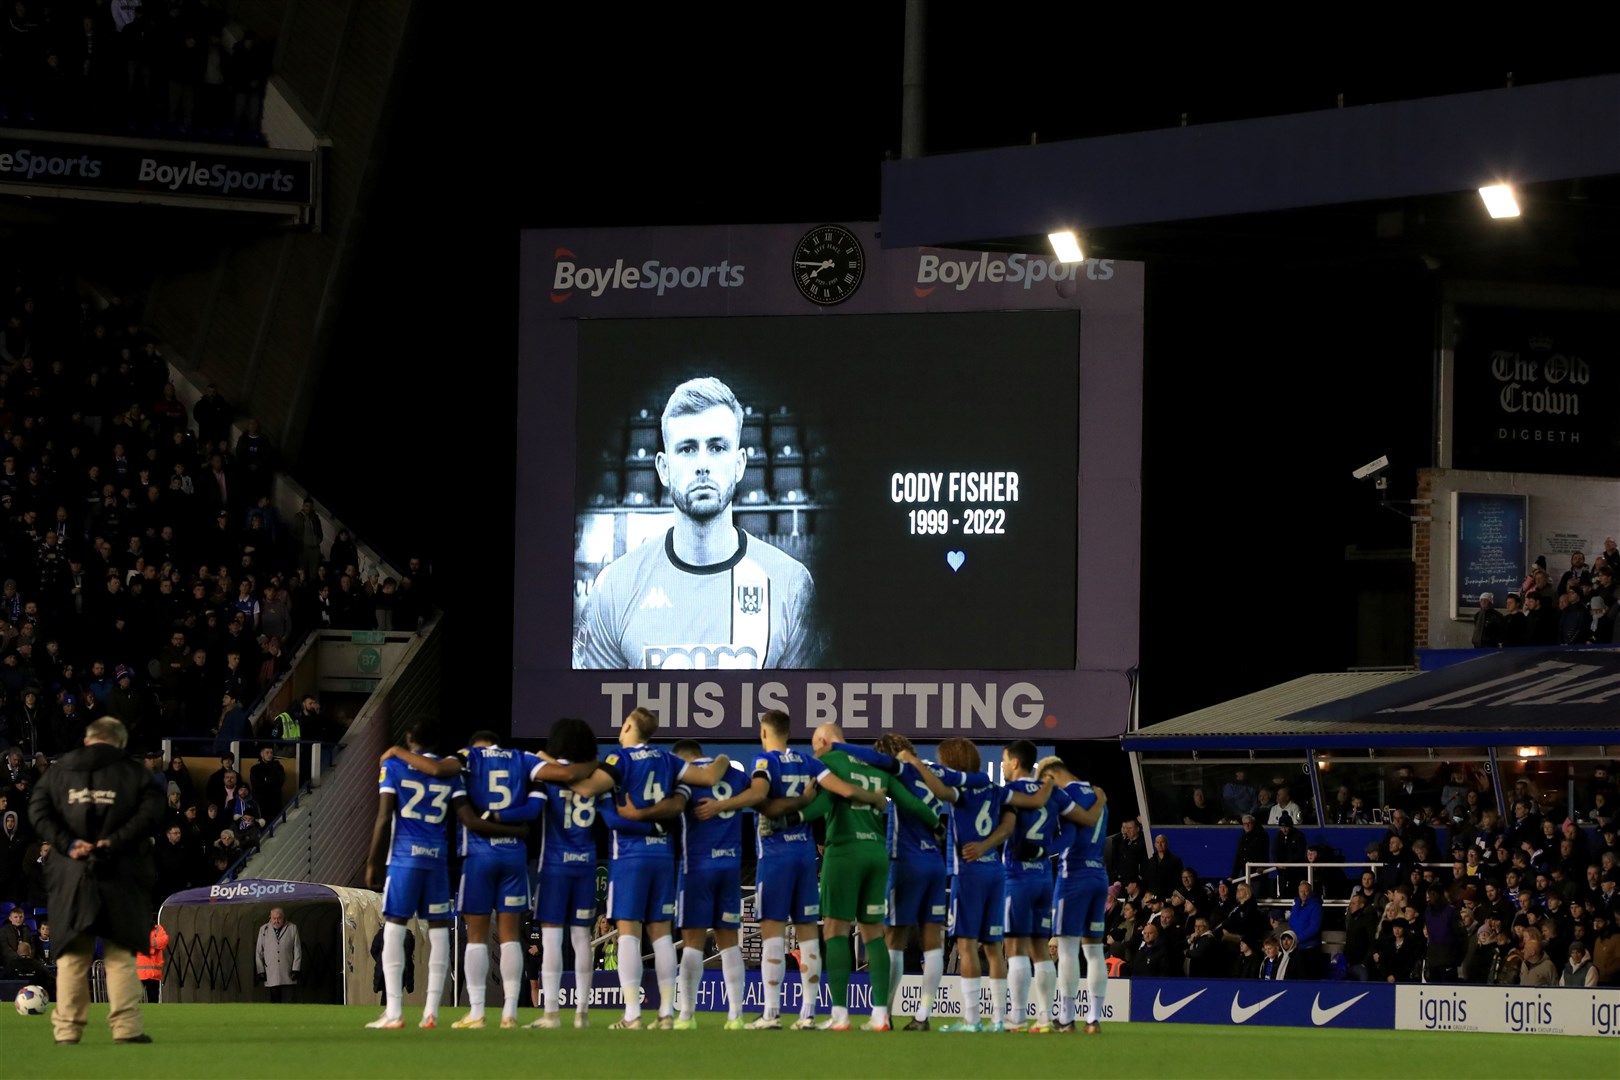 Players of both teams observe a minute’s silence for Cody Fisher ahead of the Sky Bet Championship match at St Andrew’s (Bradley Collyer/PA)